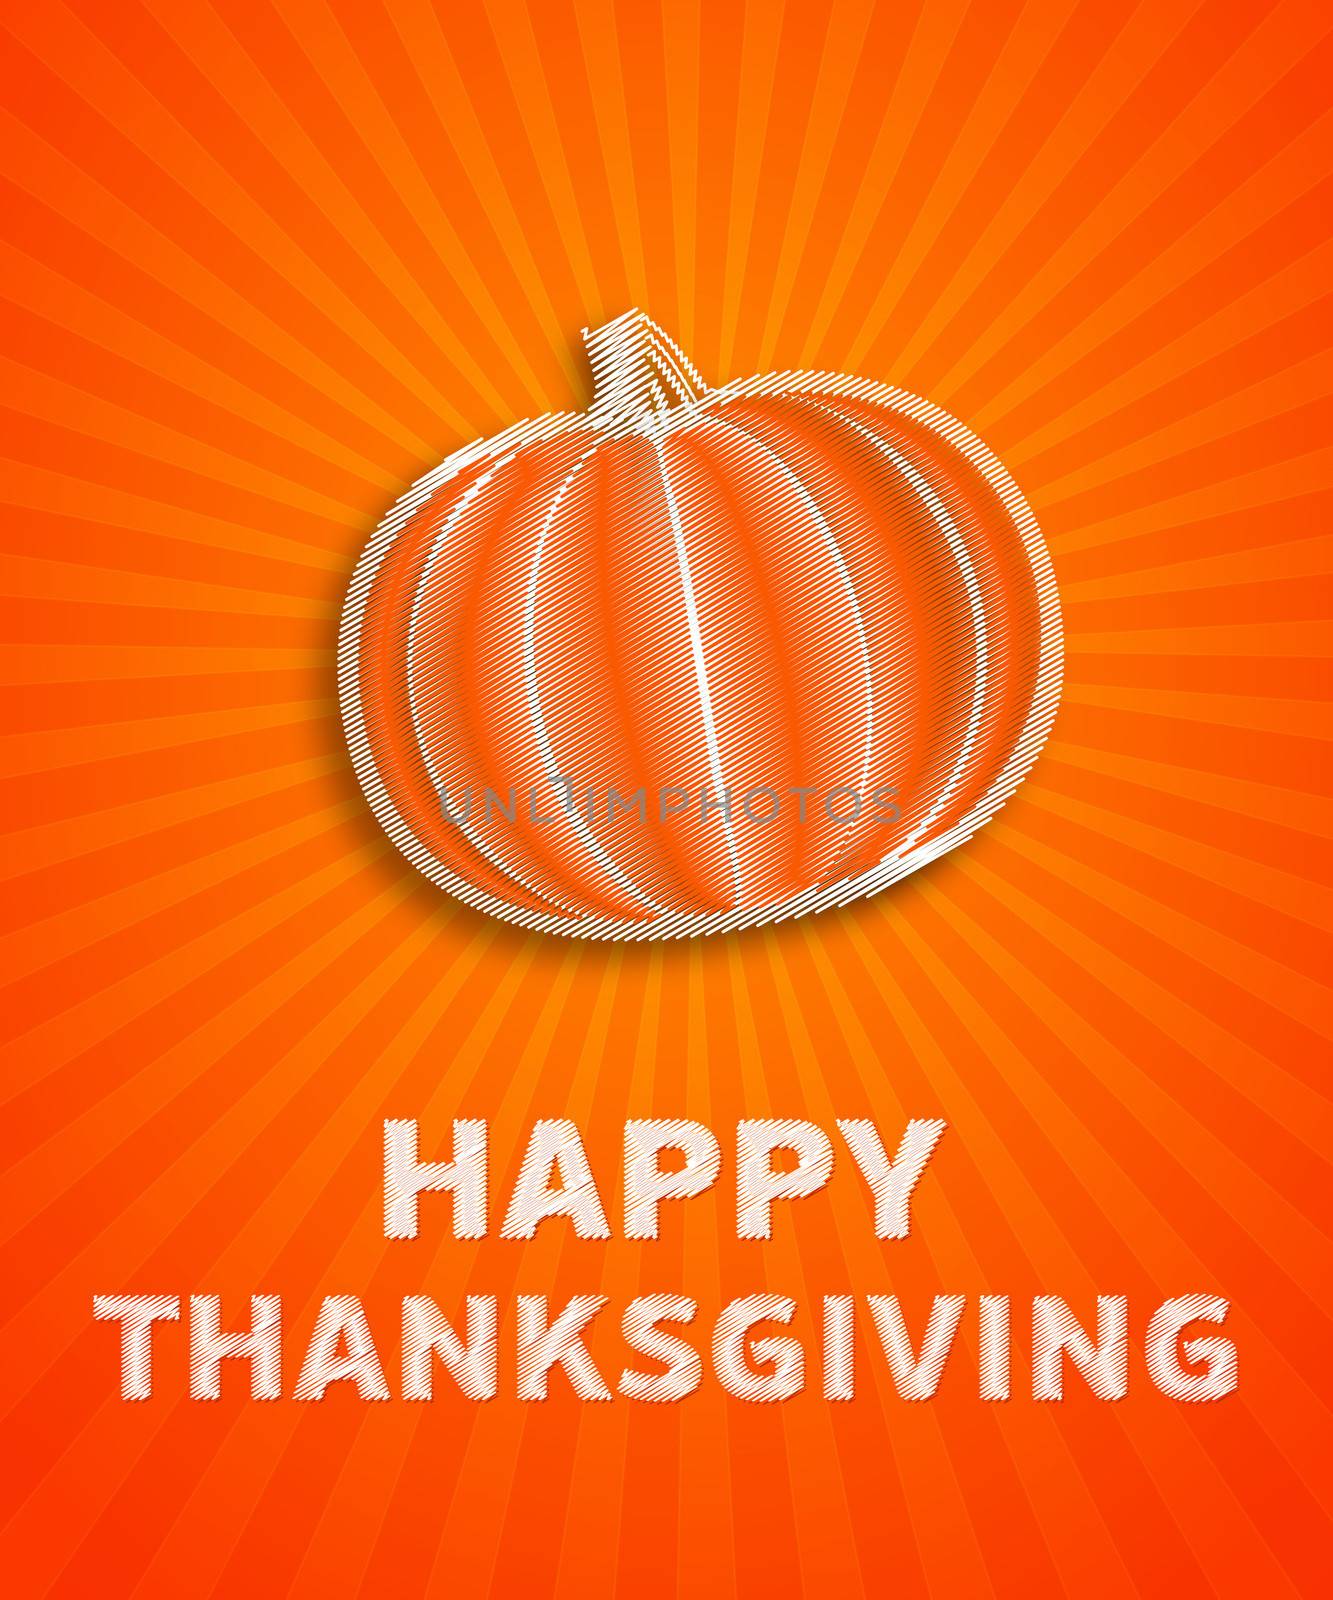 text happy thanksgiving on abstract autumn illustration with striped pumpkin over orange gradient rays